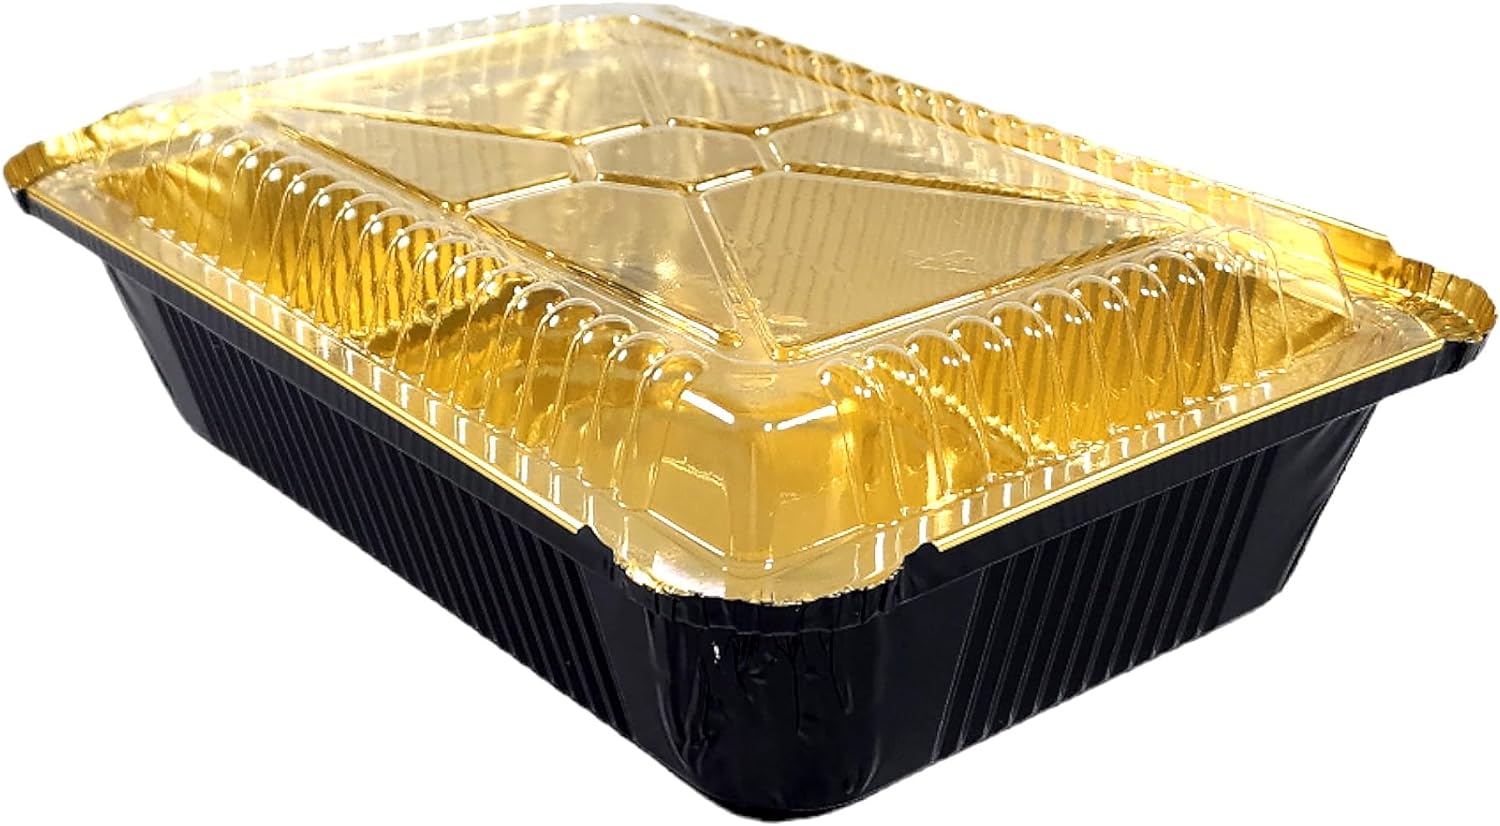 7 oz Rectangle Gold Aluminum Baking Loaf Pan - with Plastic Dome